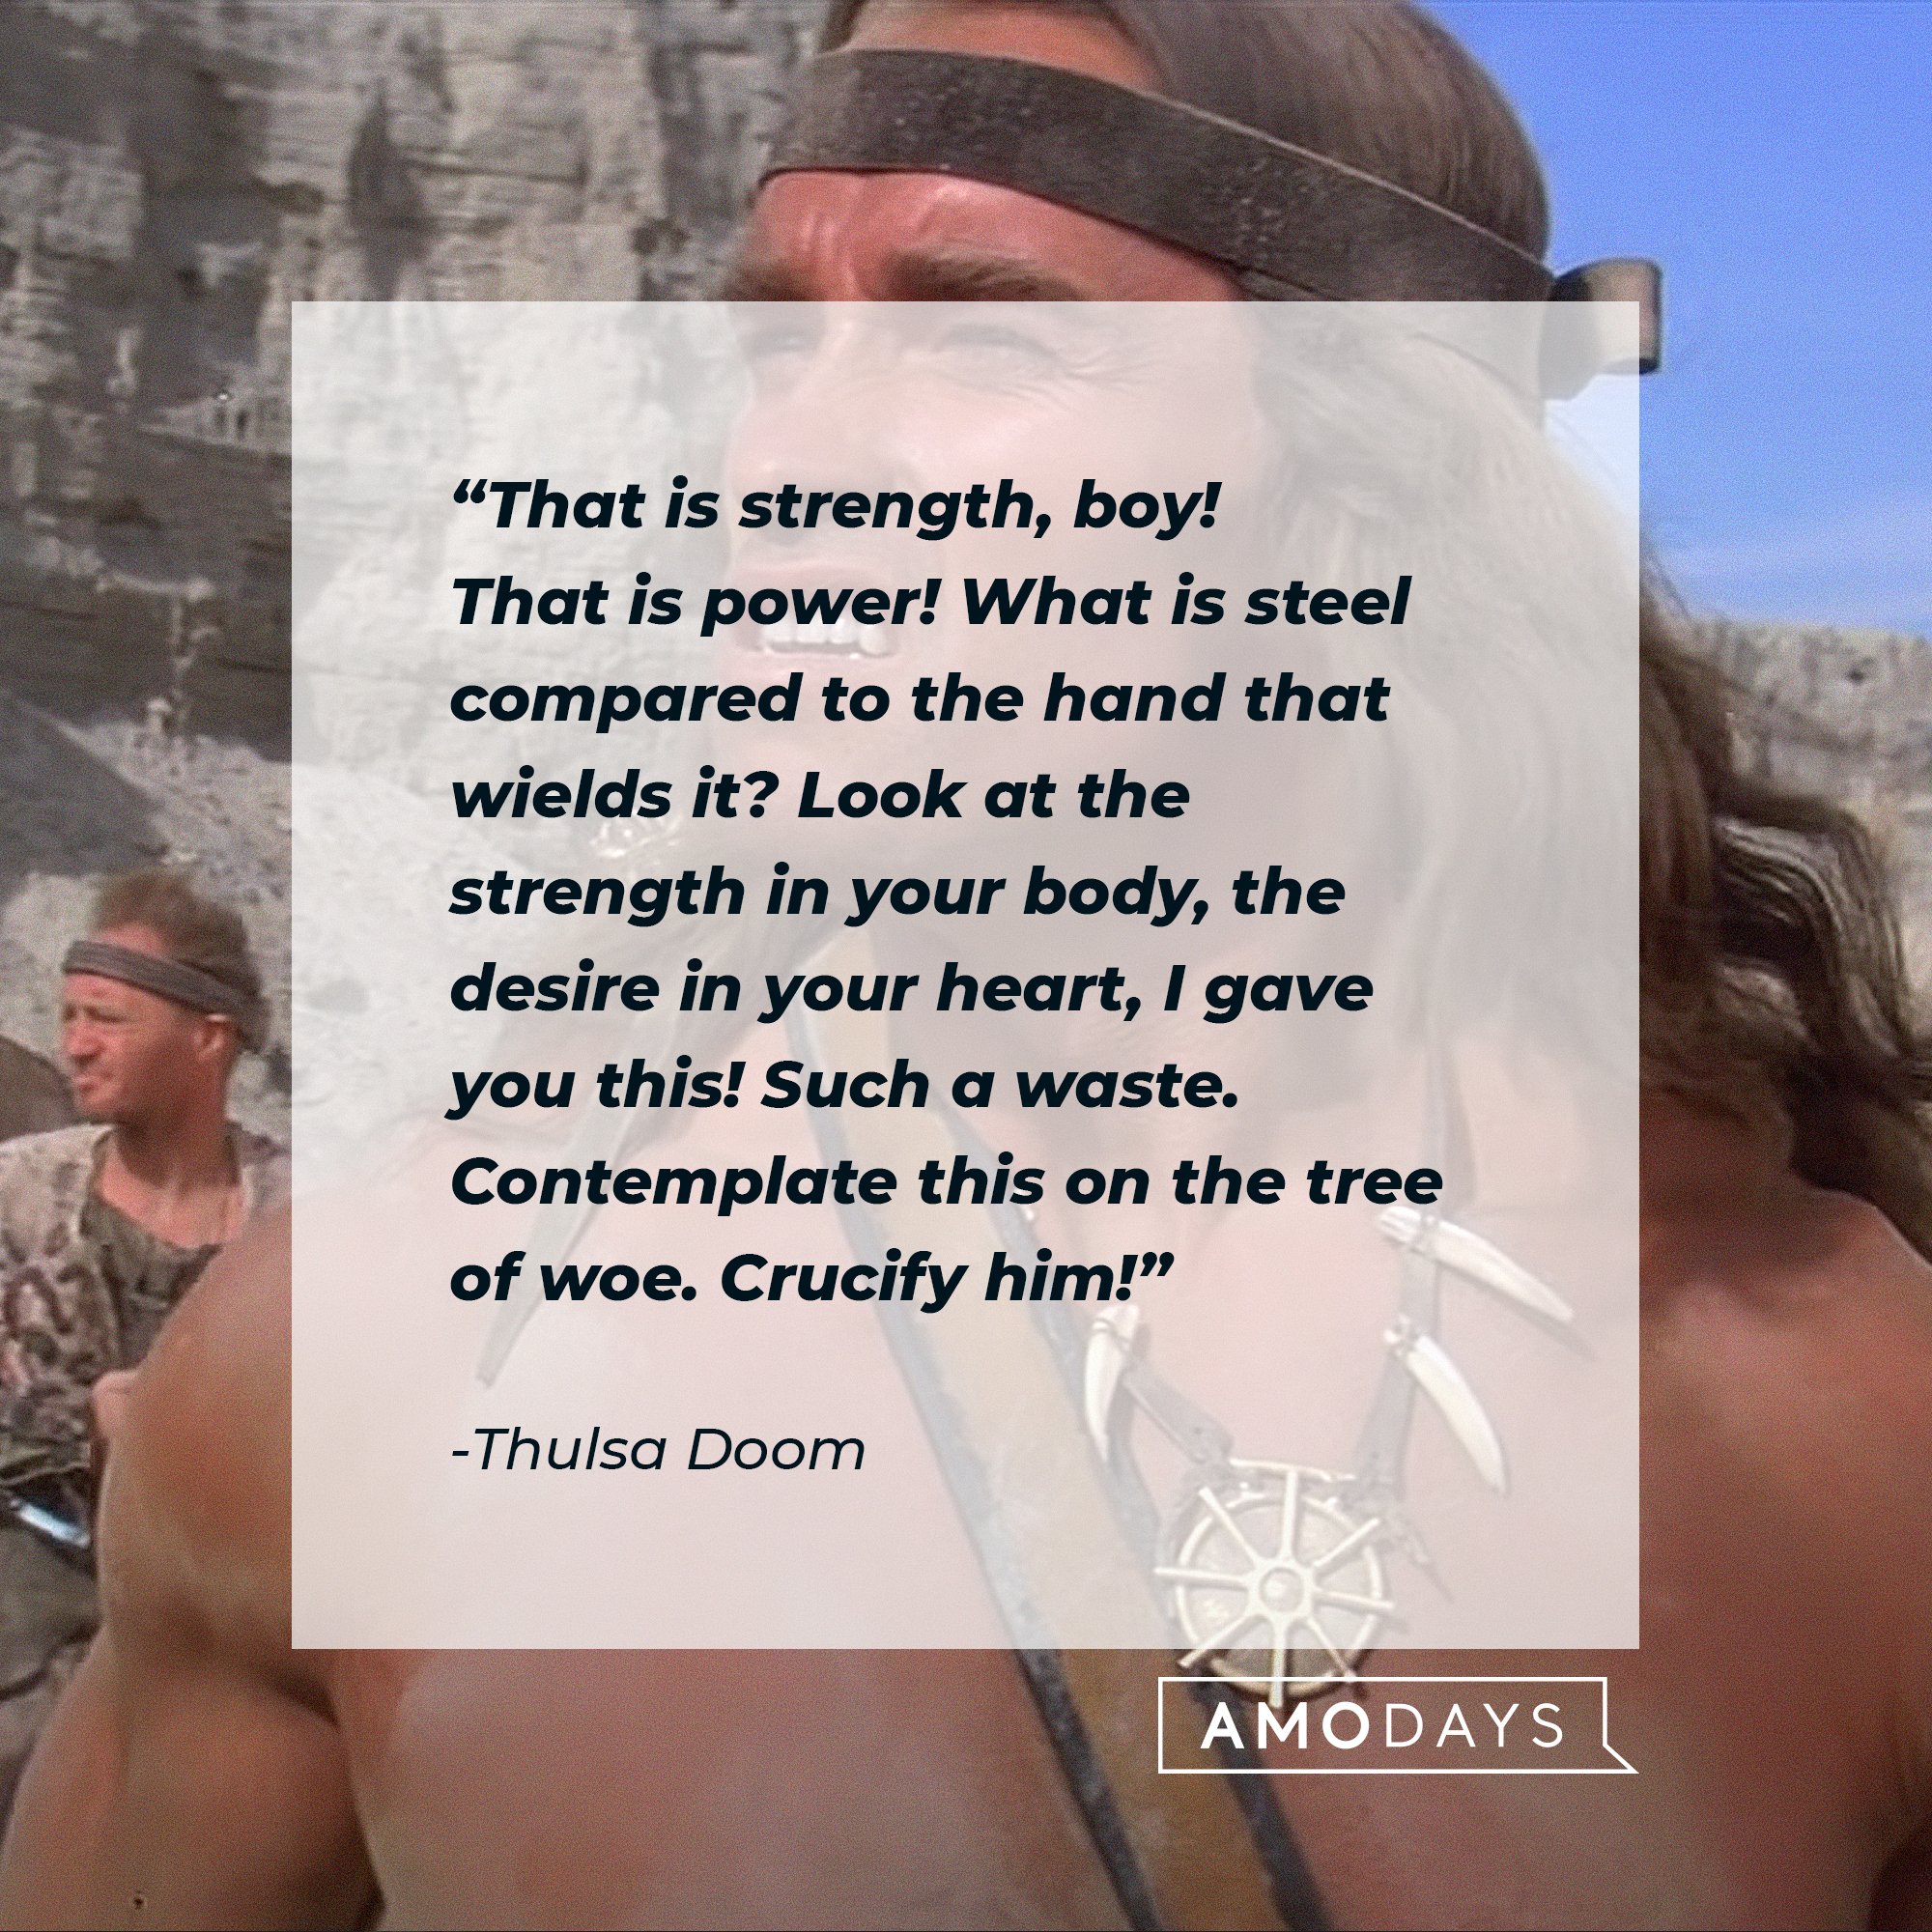  Thulsa Doom's quote: “That is strength, boy! That is power! What is steel compared to the hand that wields it? Look at the strength in your body, the desire in your heart, I gave you this! Such a waste. Contemplate this on the tree of woe. Crucify him!” | Image: AmoDays